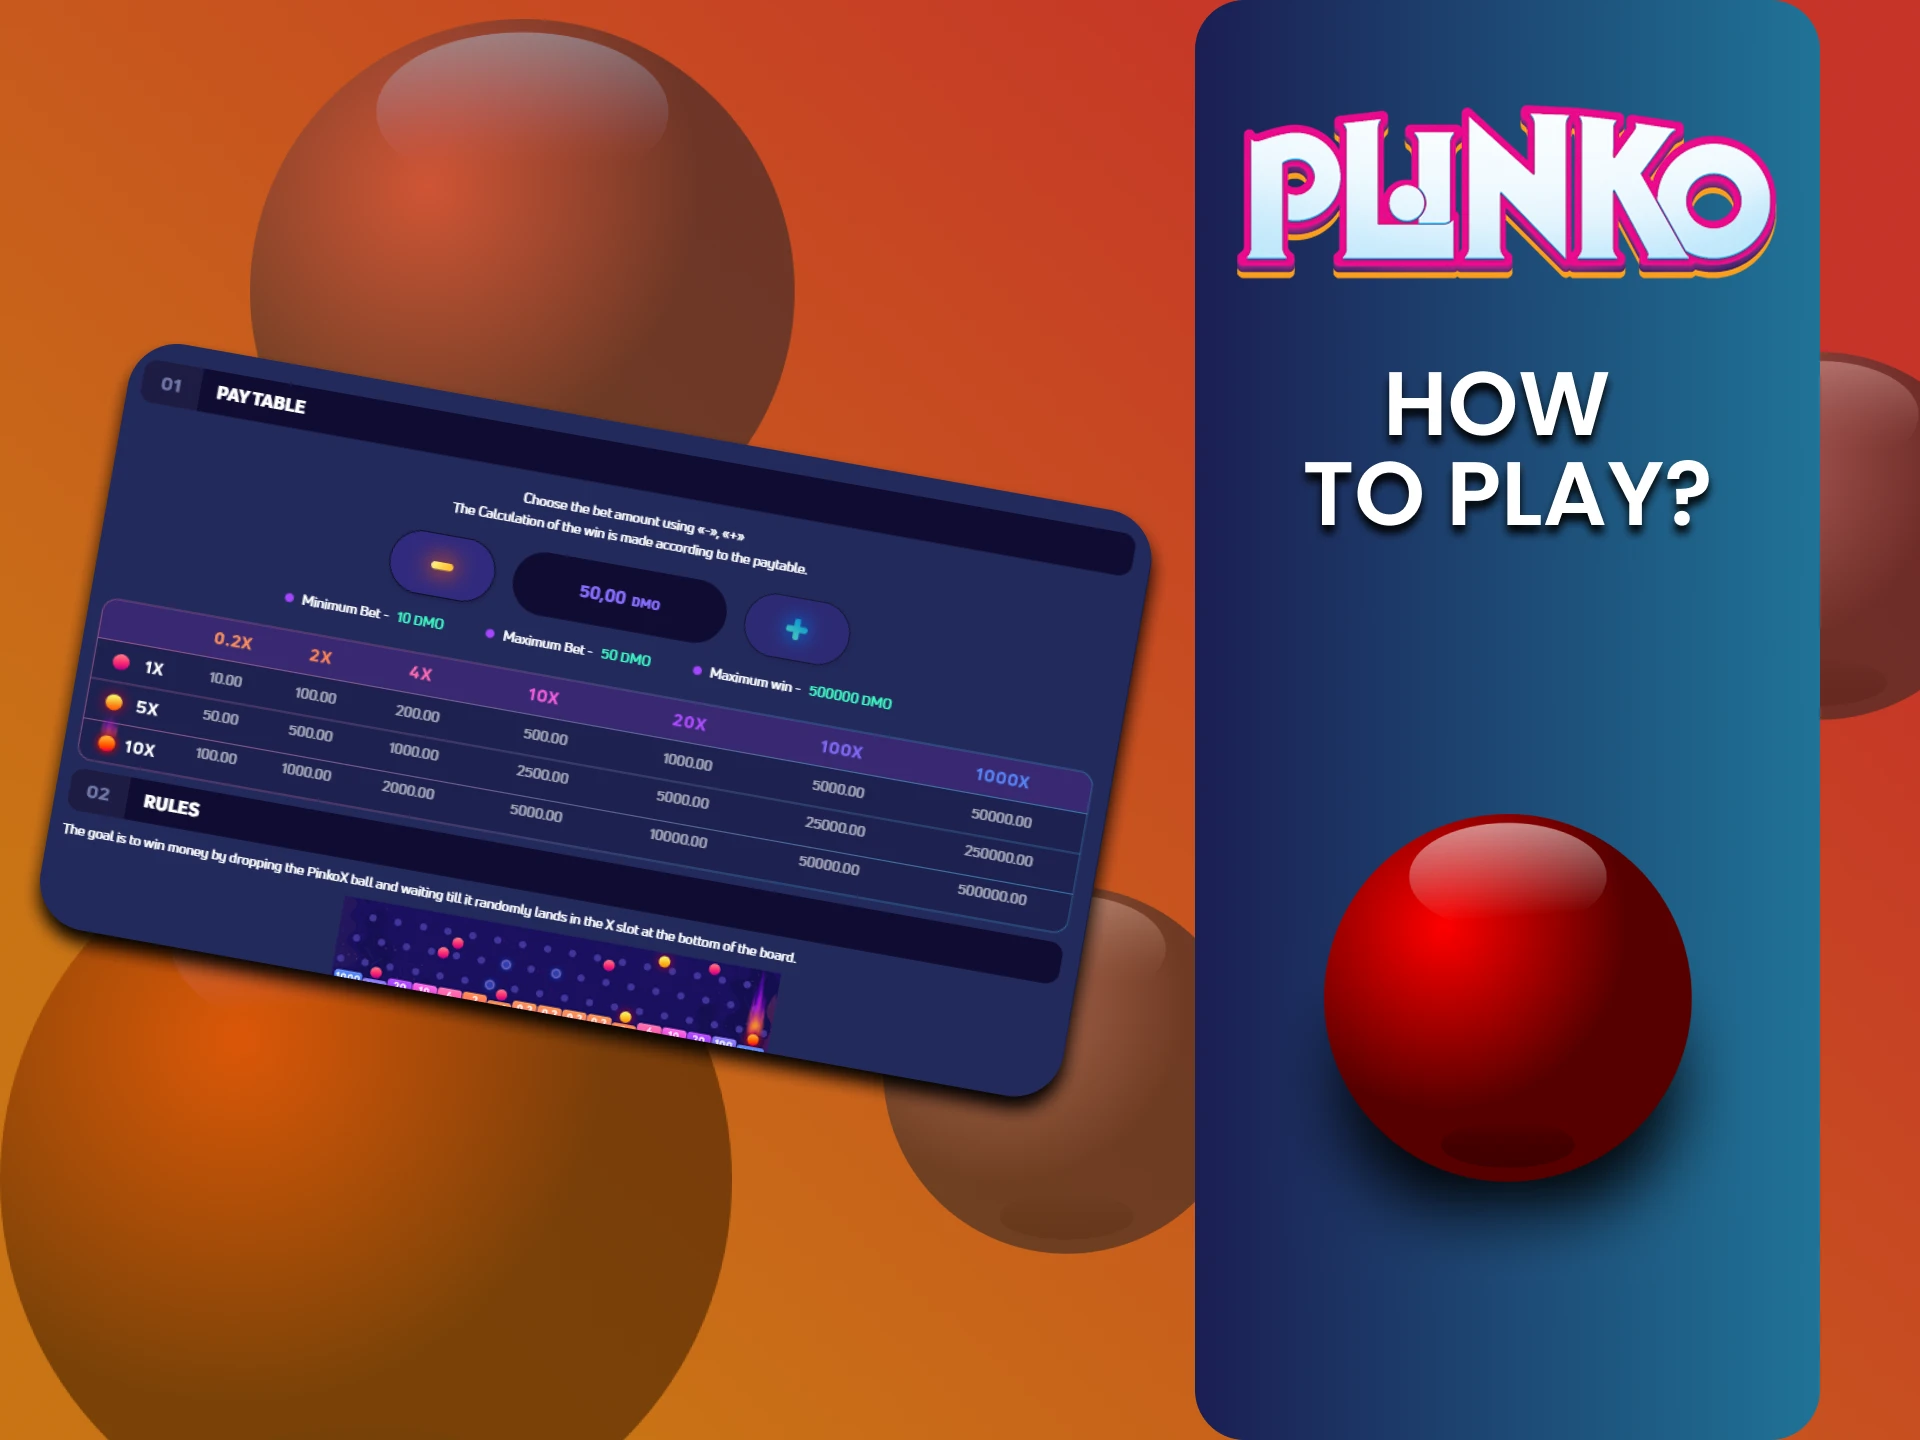 We will show you how to start playing Plinko.